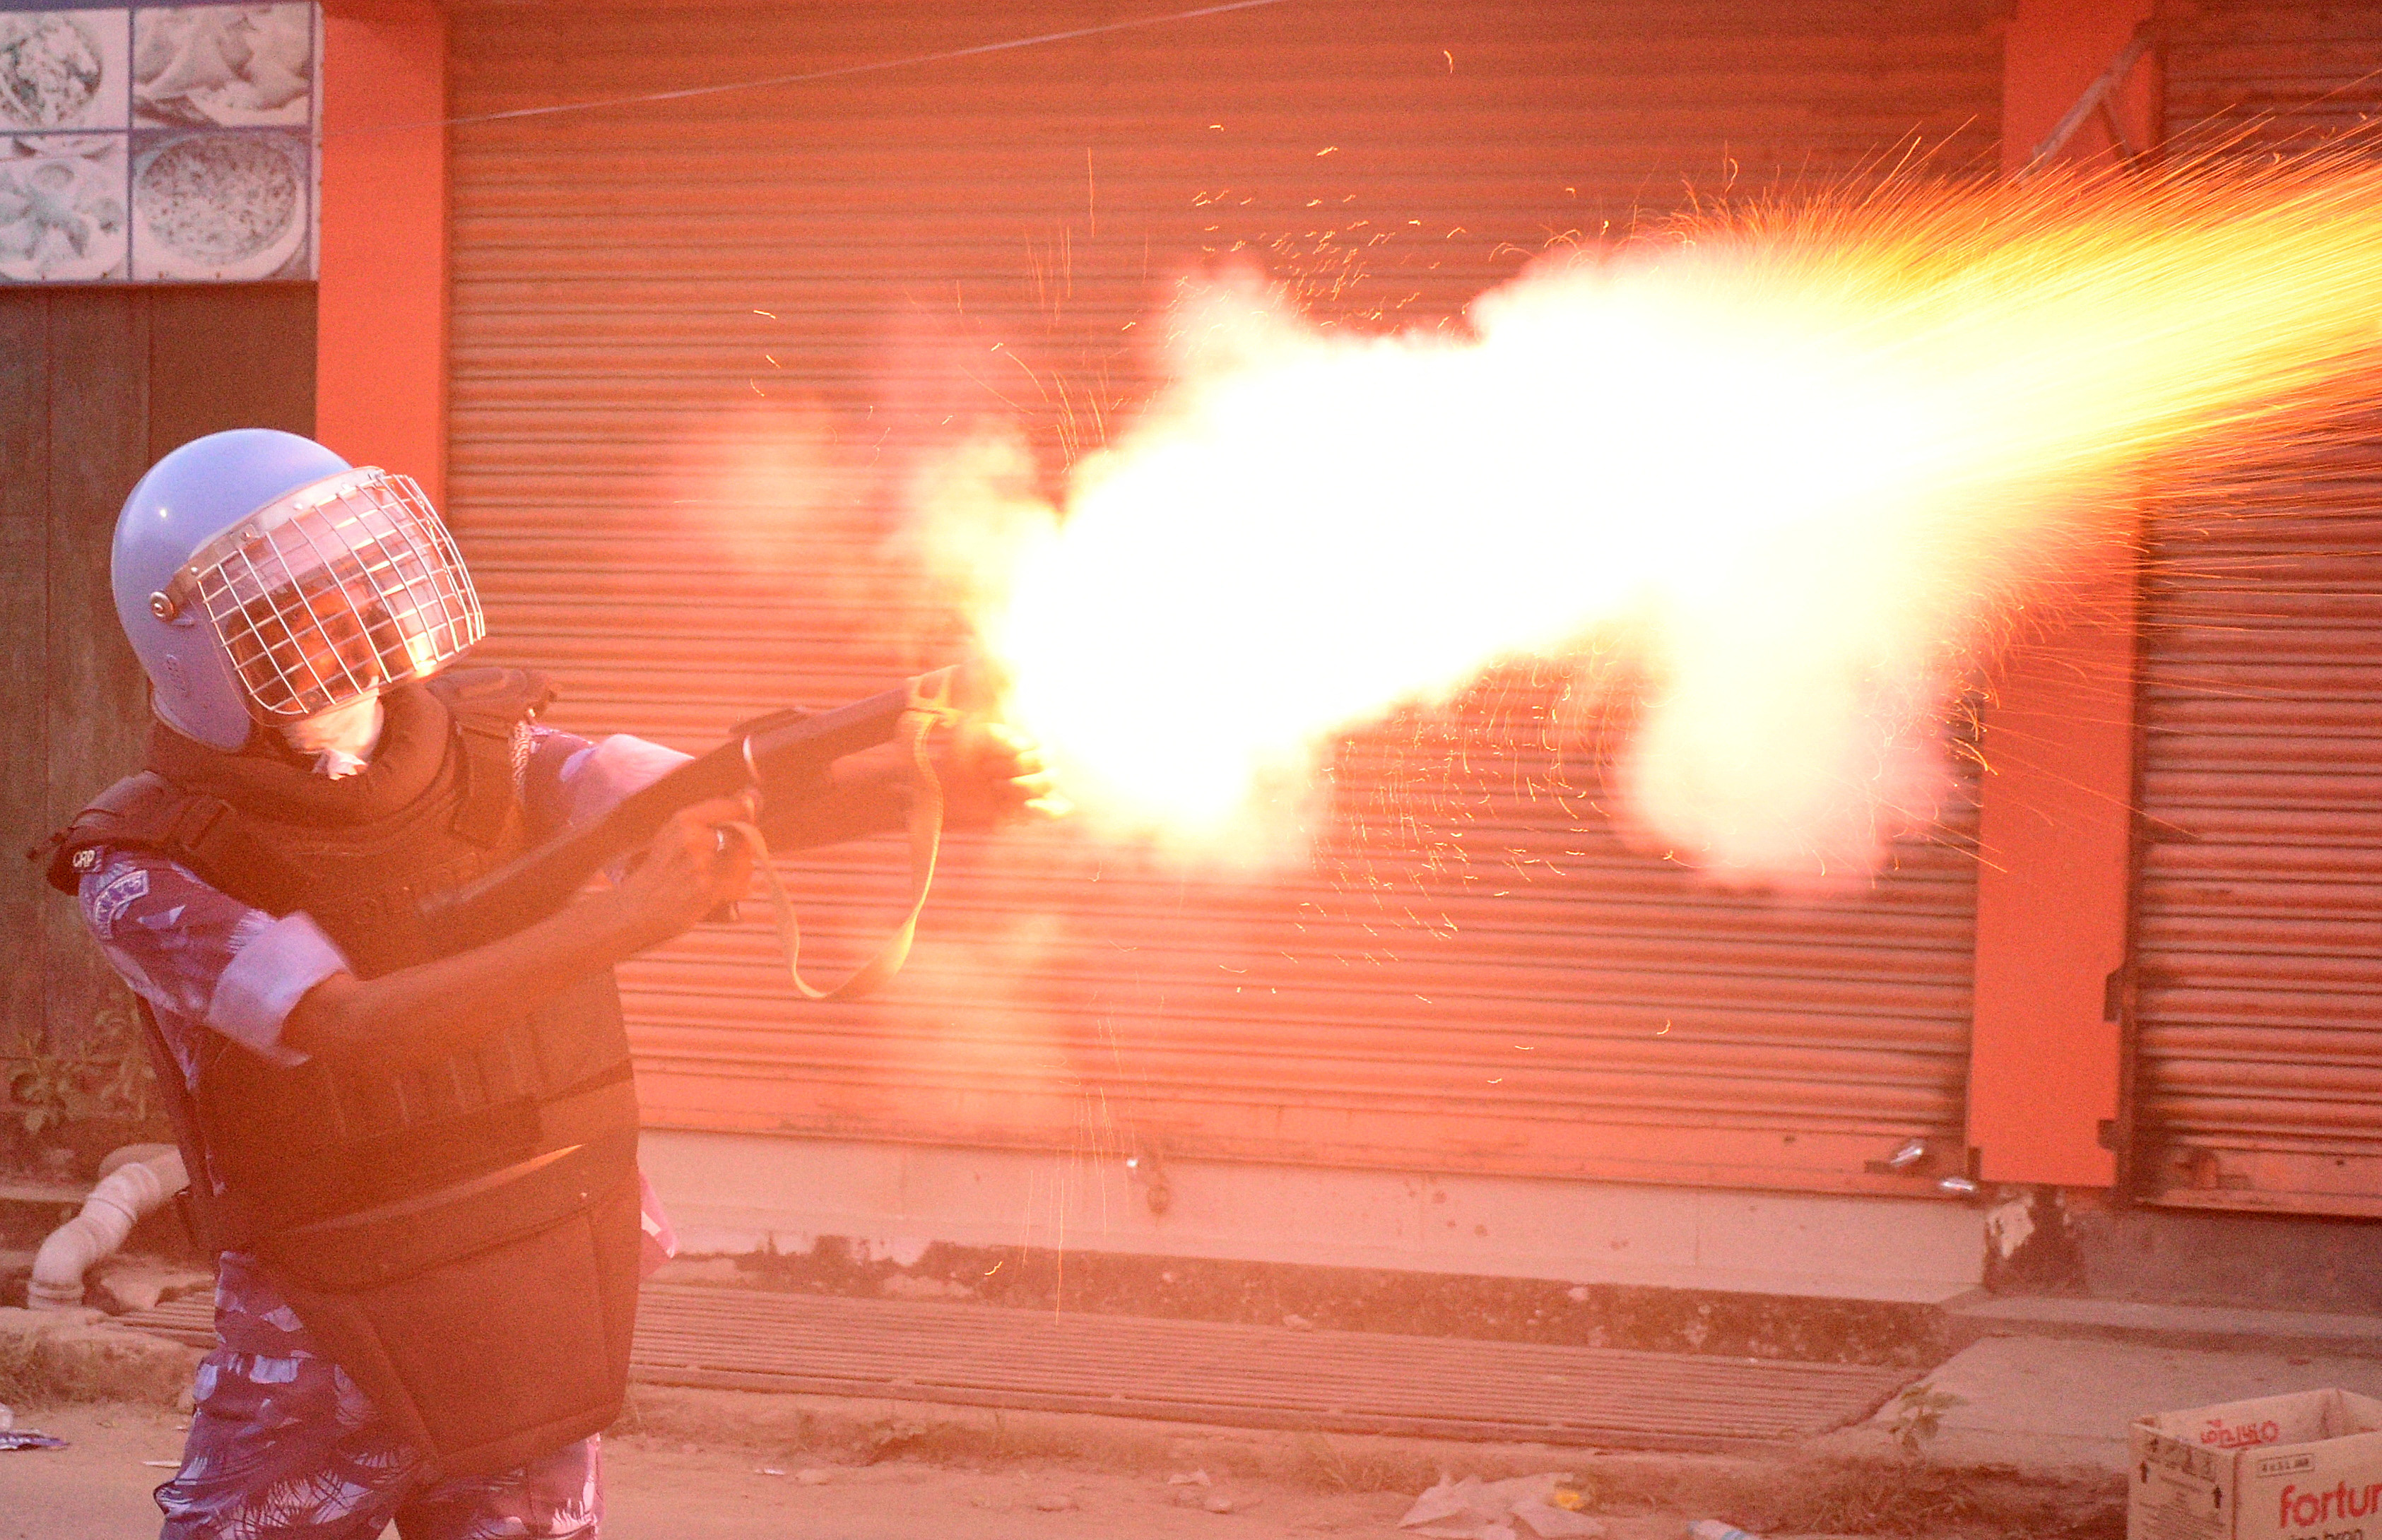 A riot police officer fires a tear smoke shell to disperse demonstrators, in Imphal